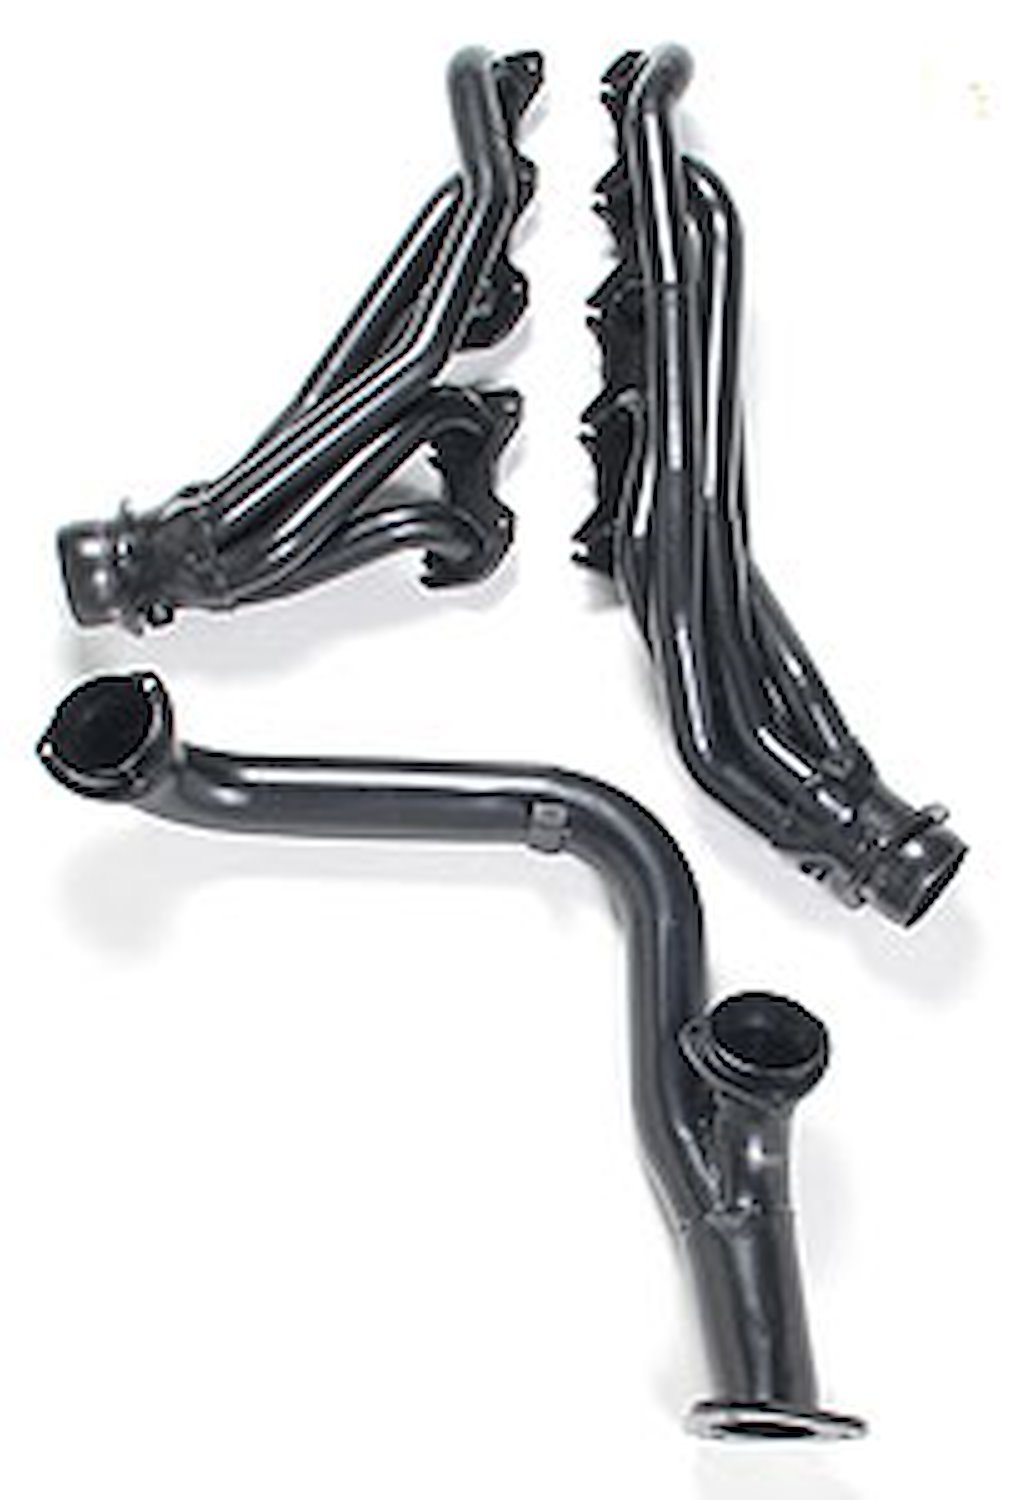 Standard Duty Uncoated Headers for 1999-2005 F-250/F-350 Super Duty 6.8L V10